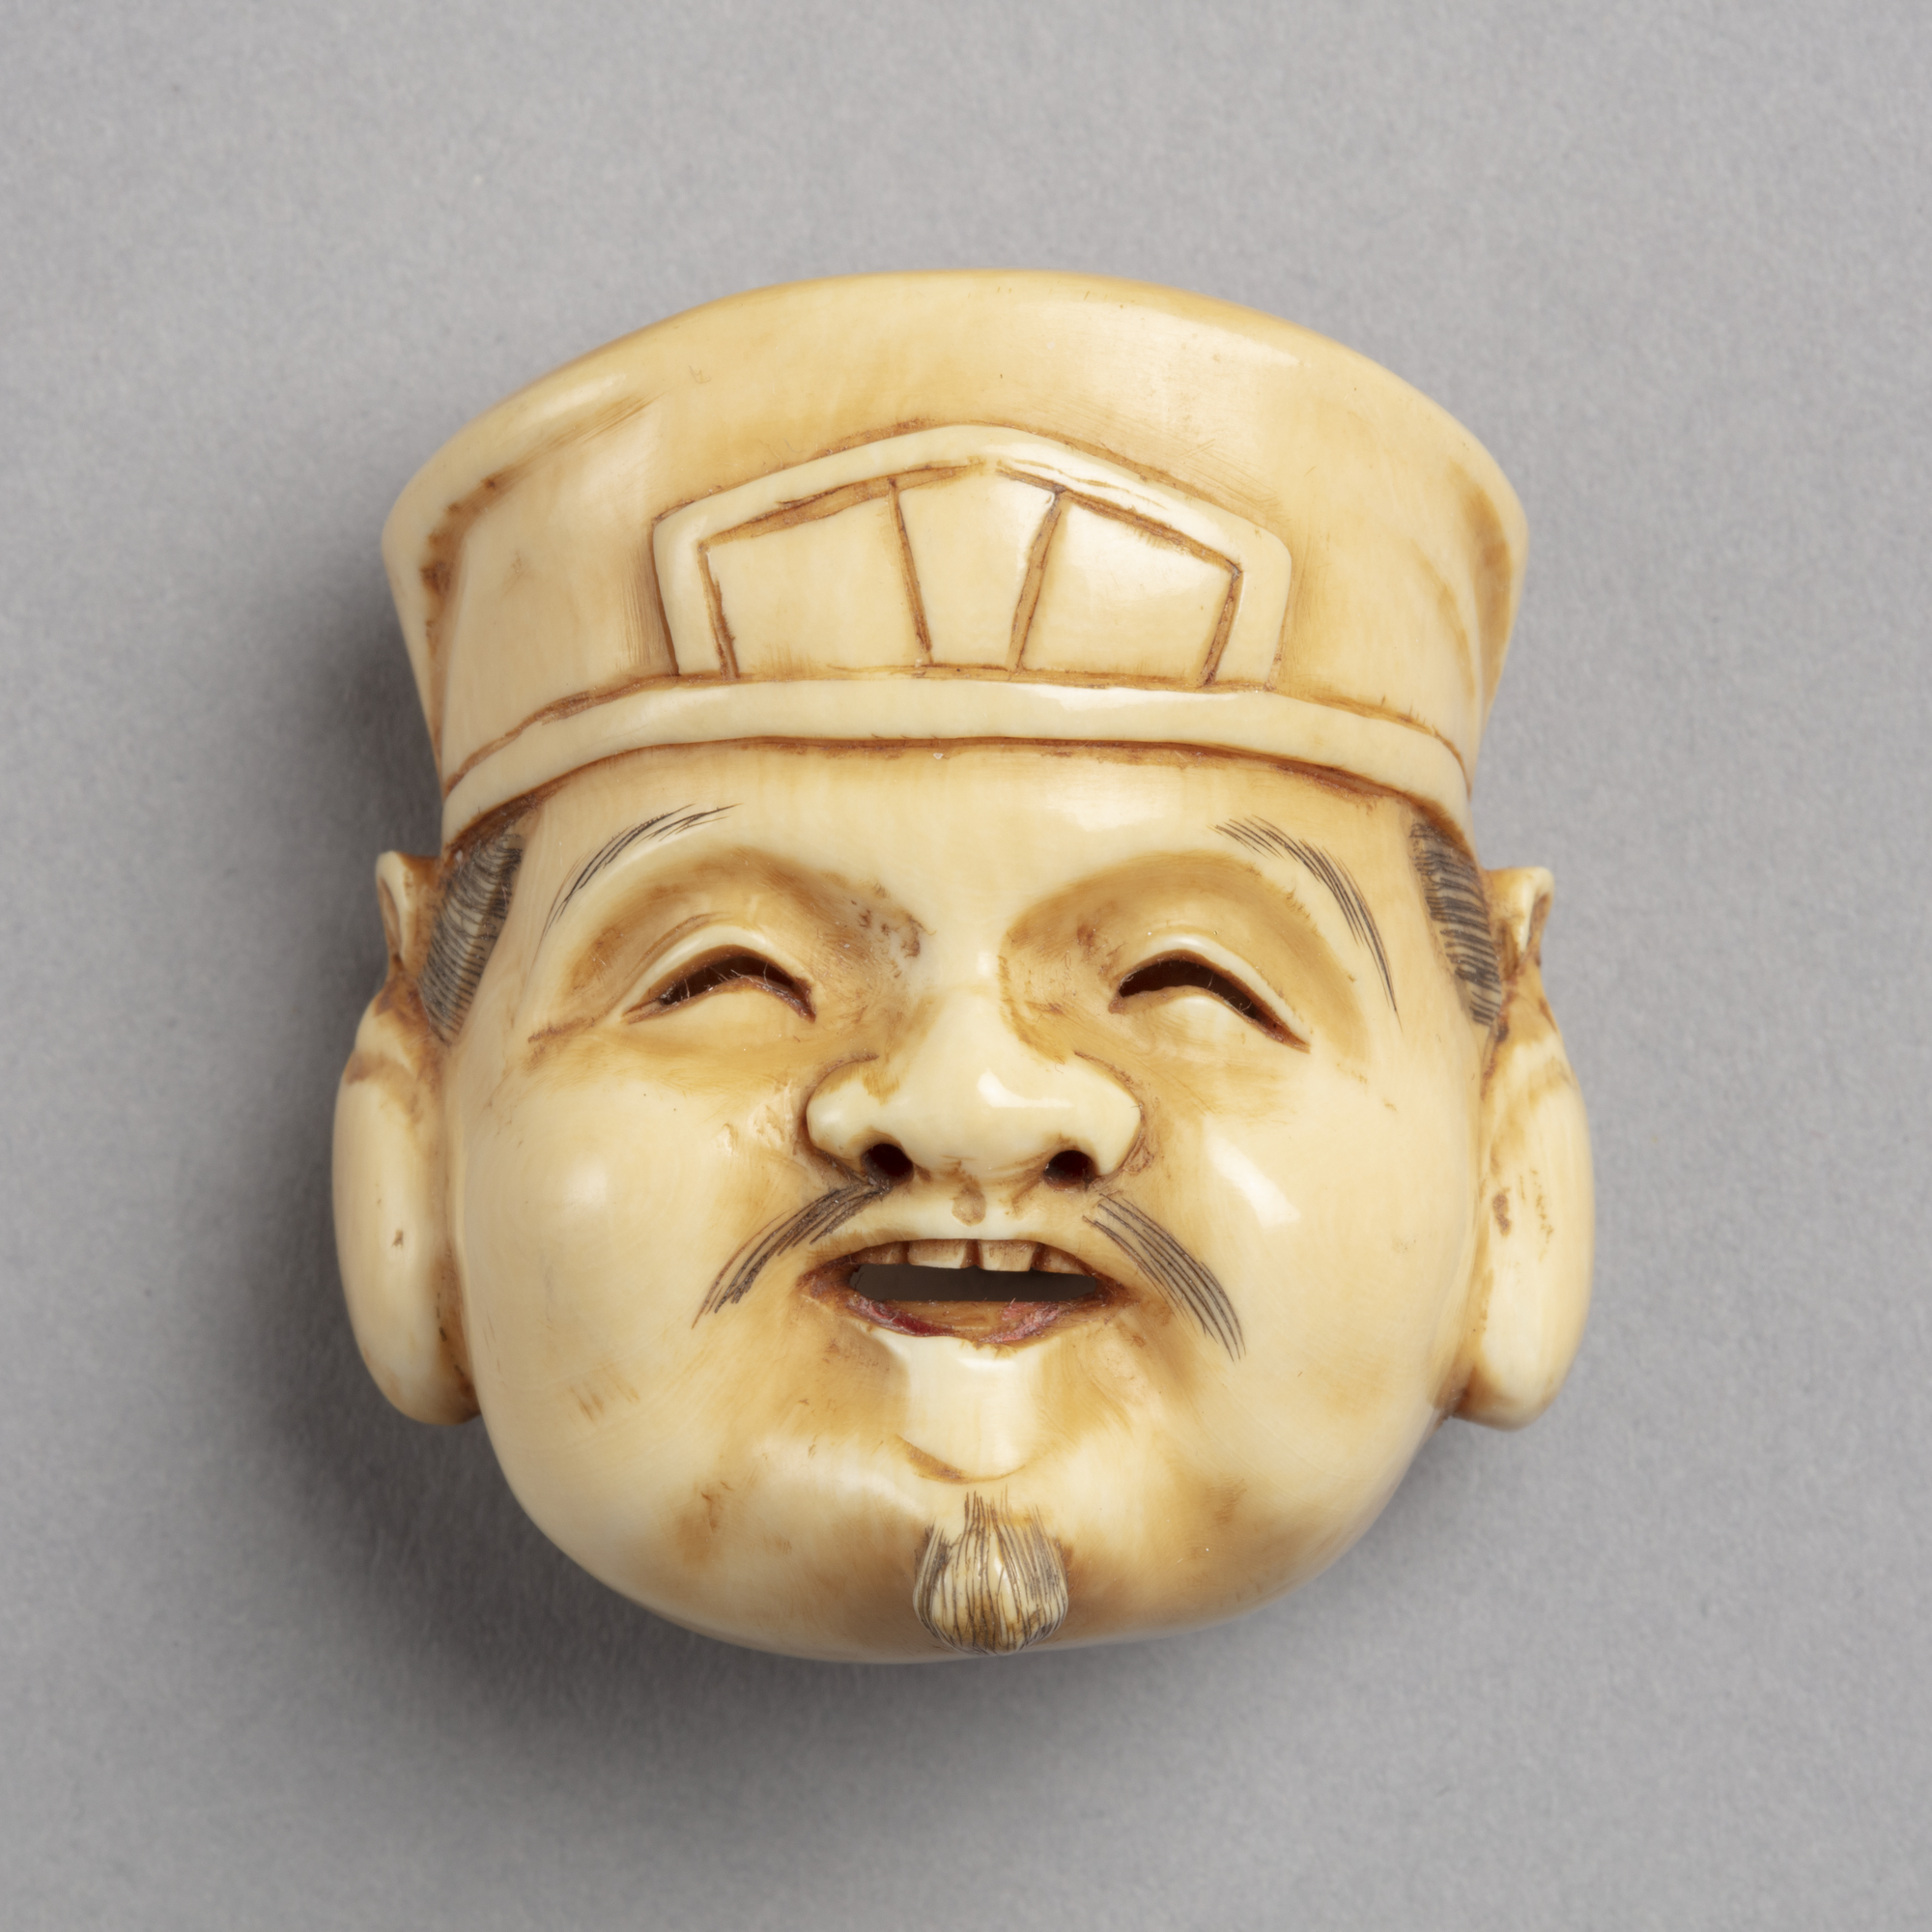 A Japanese ivory netsuke of the smiling face of Ebisu. He wears a hat and has a fine moustache and small beard.